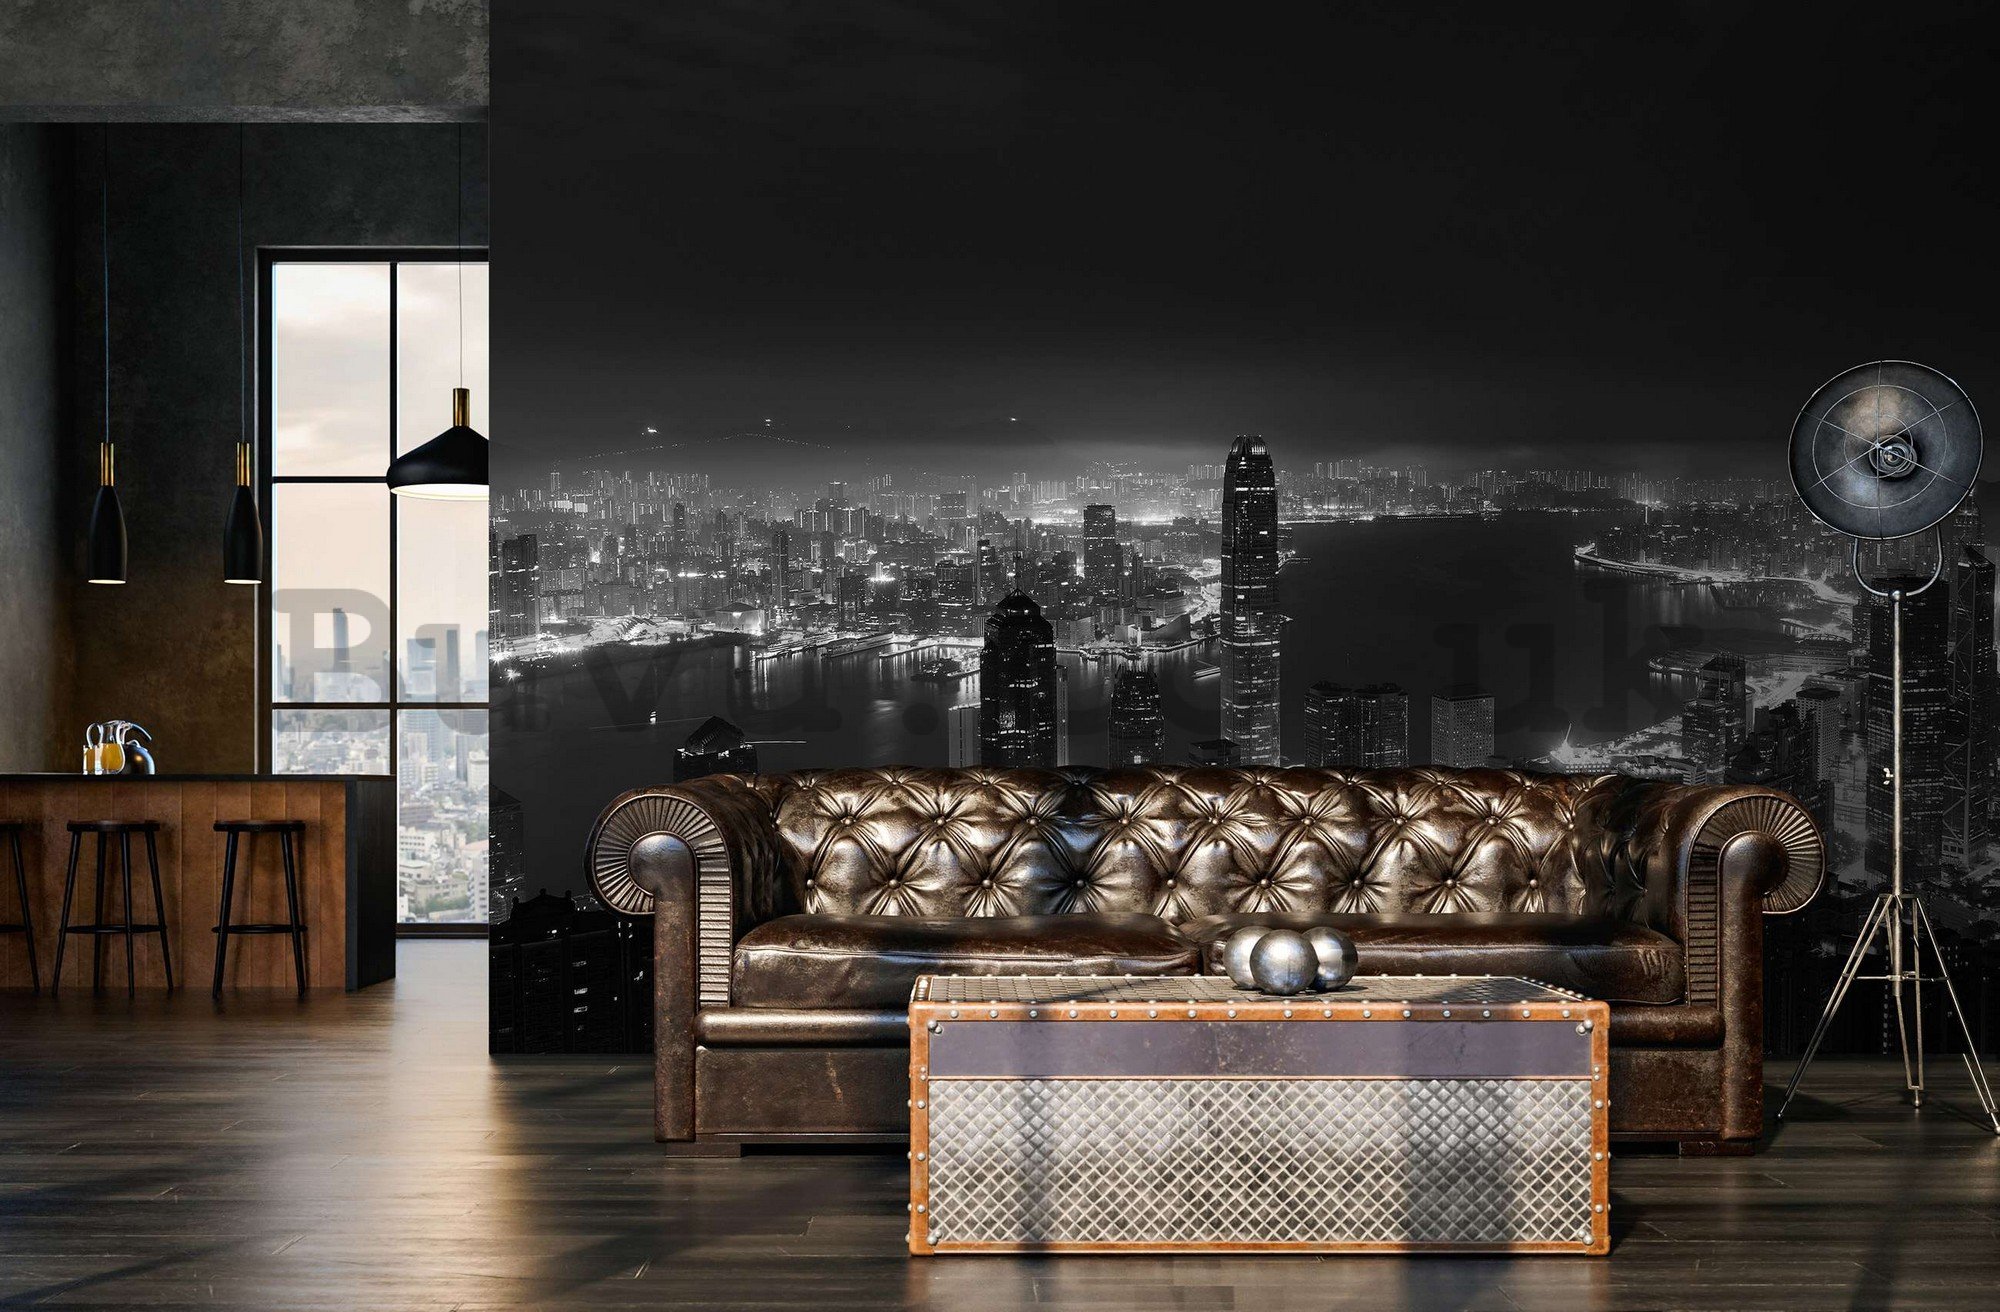 Wall mural vlies: Panorama of a big city (black and white) - 254x184 cm